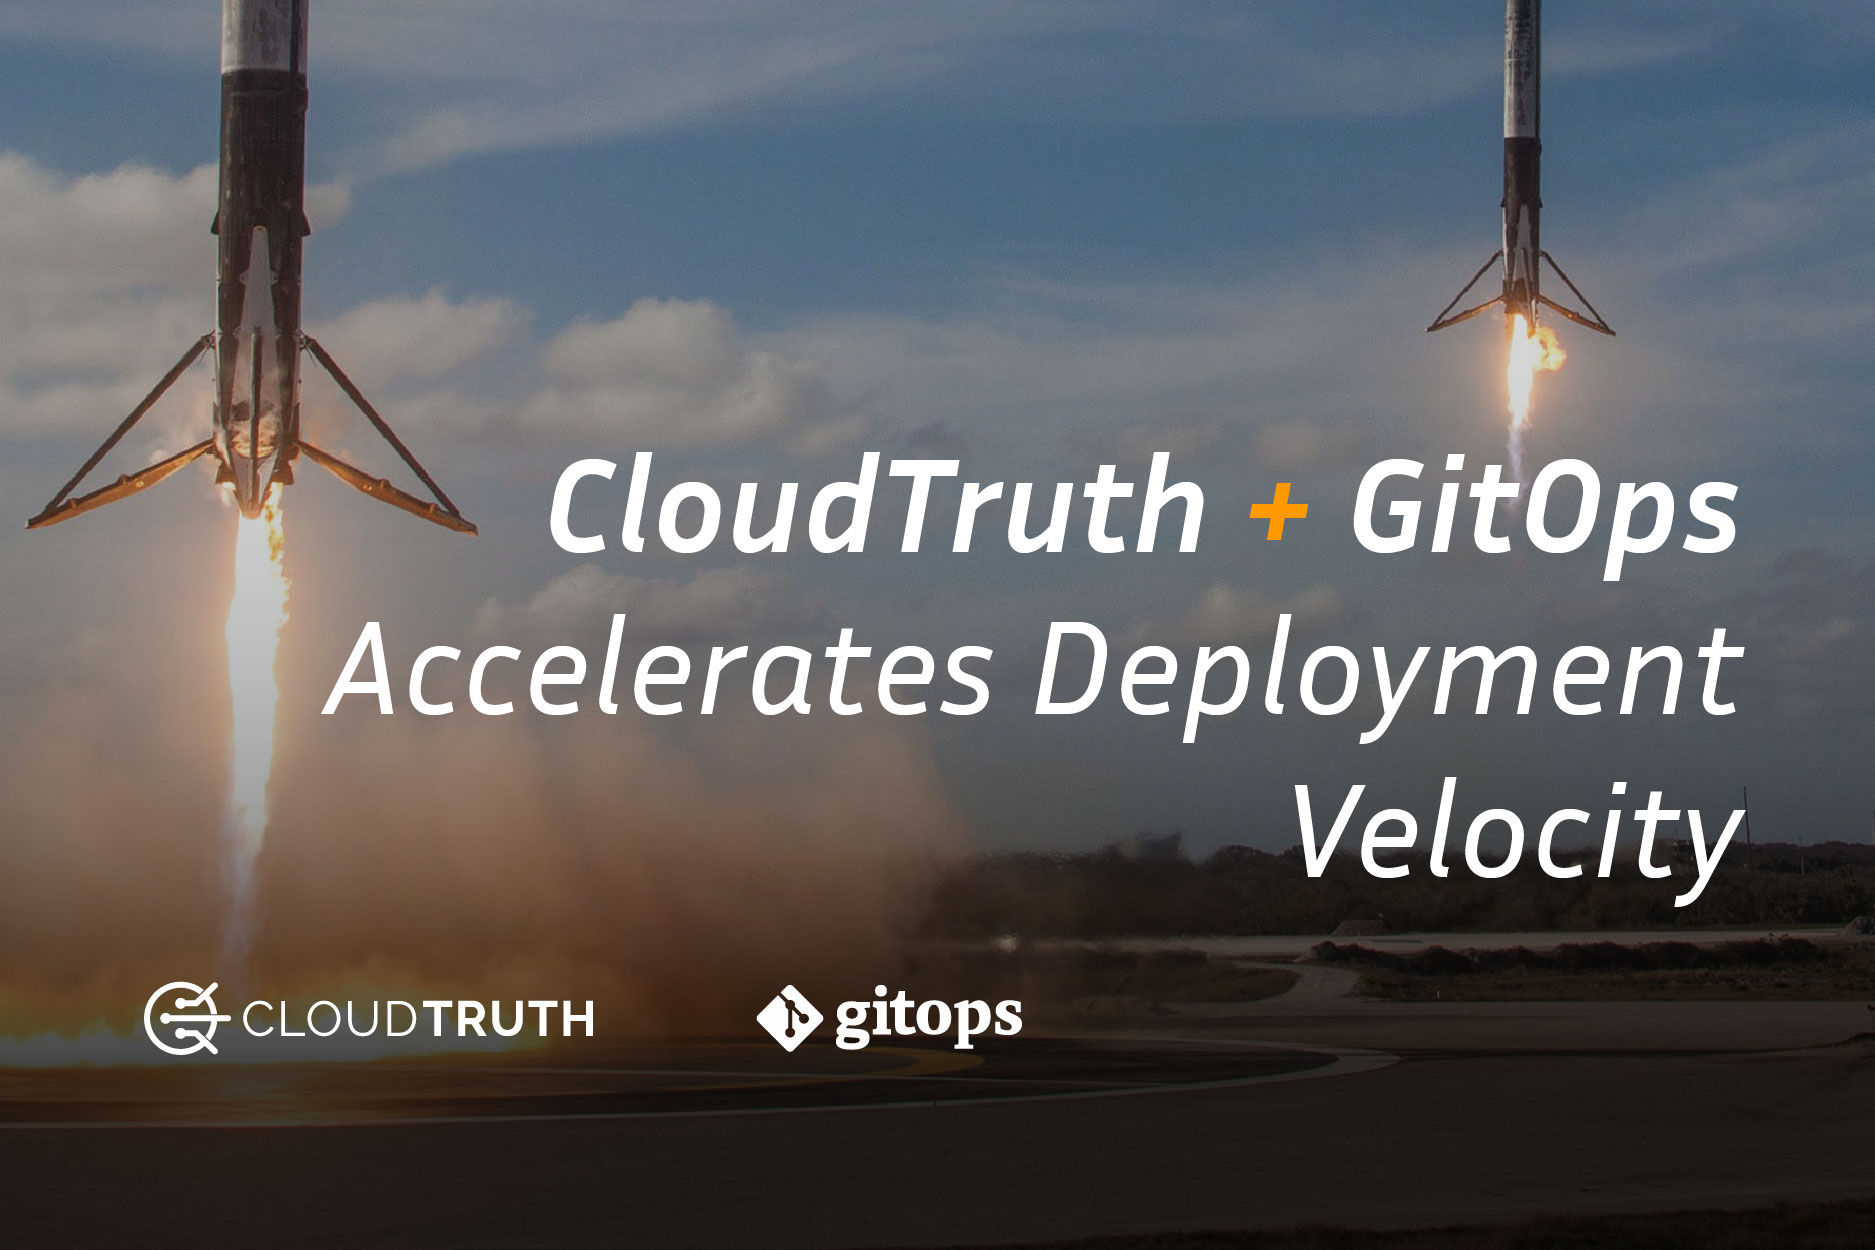 CloudTruth and Flux (GitOps)